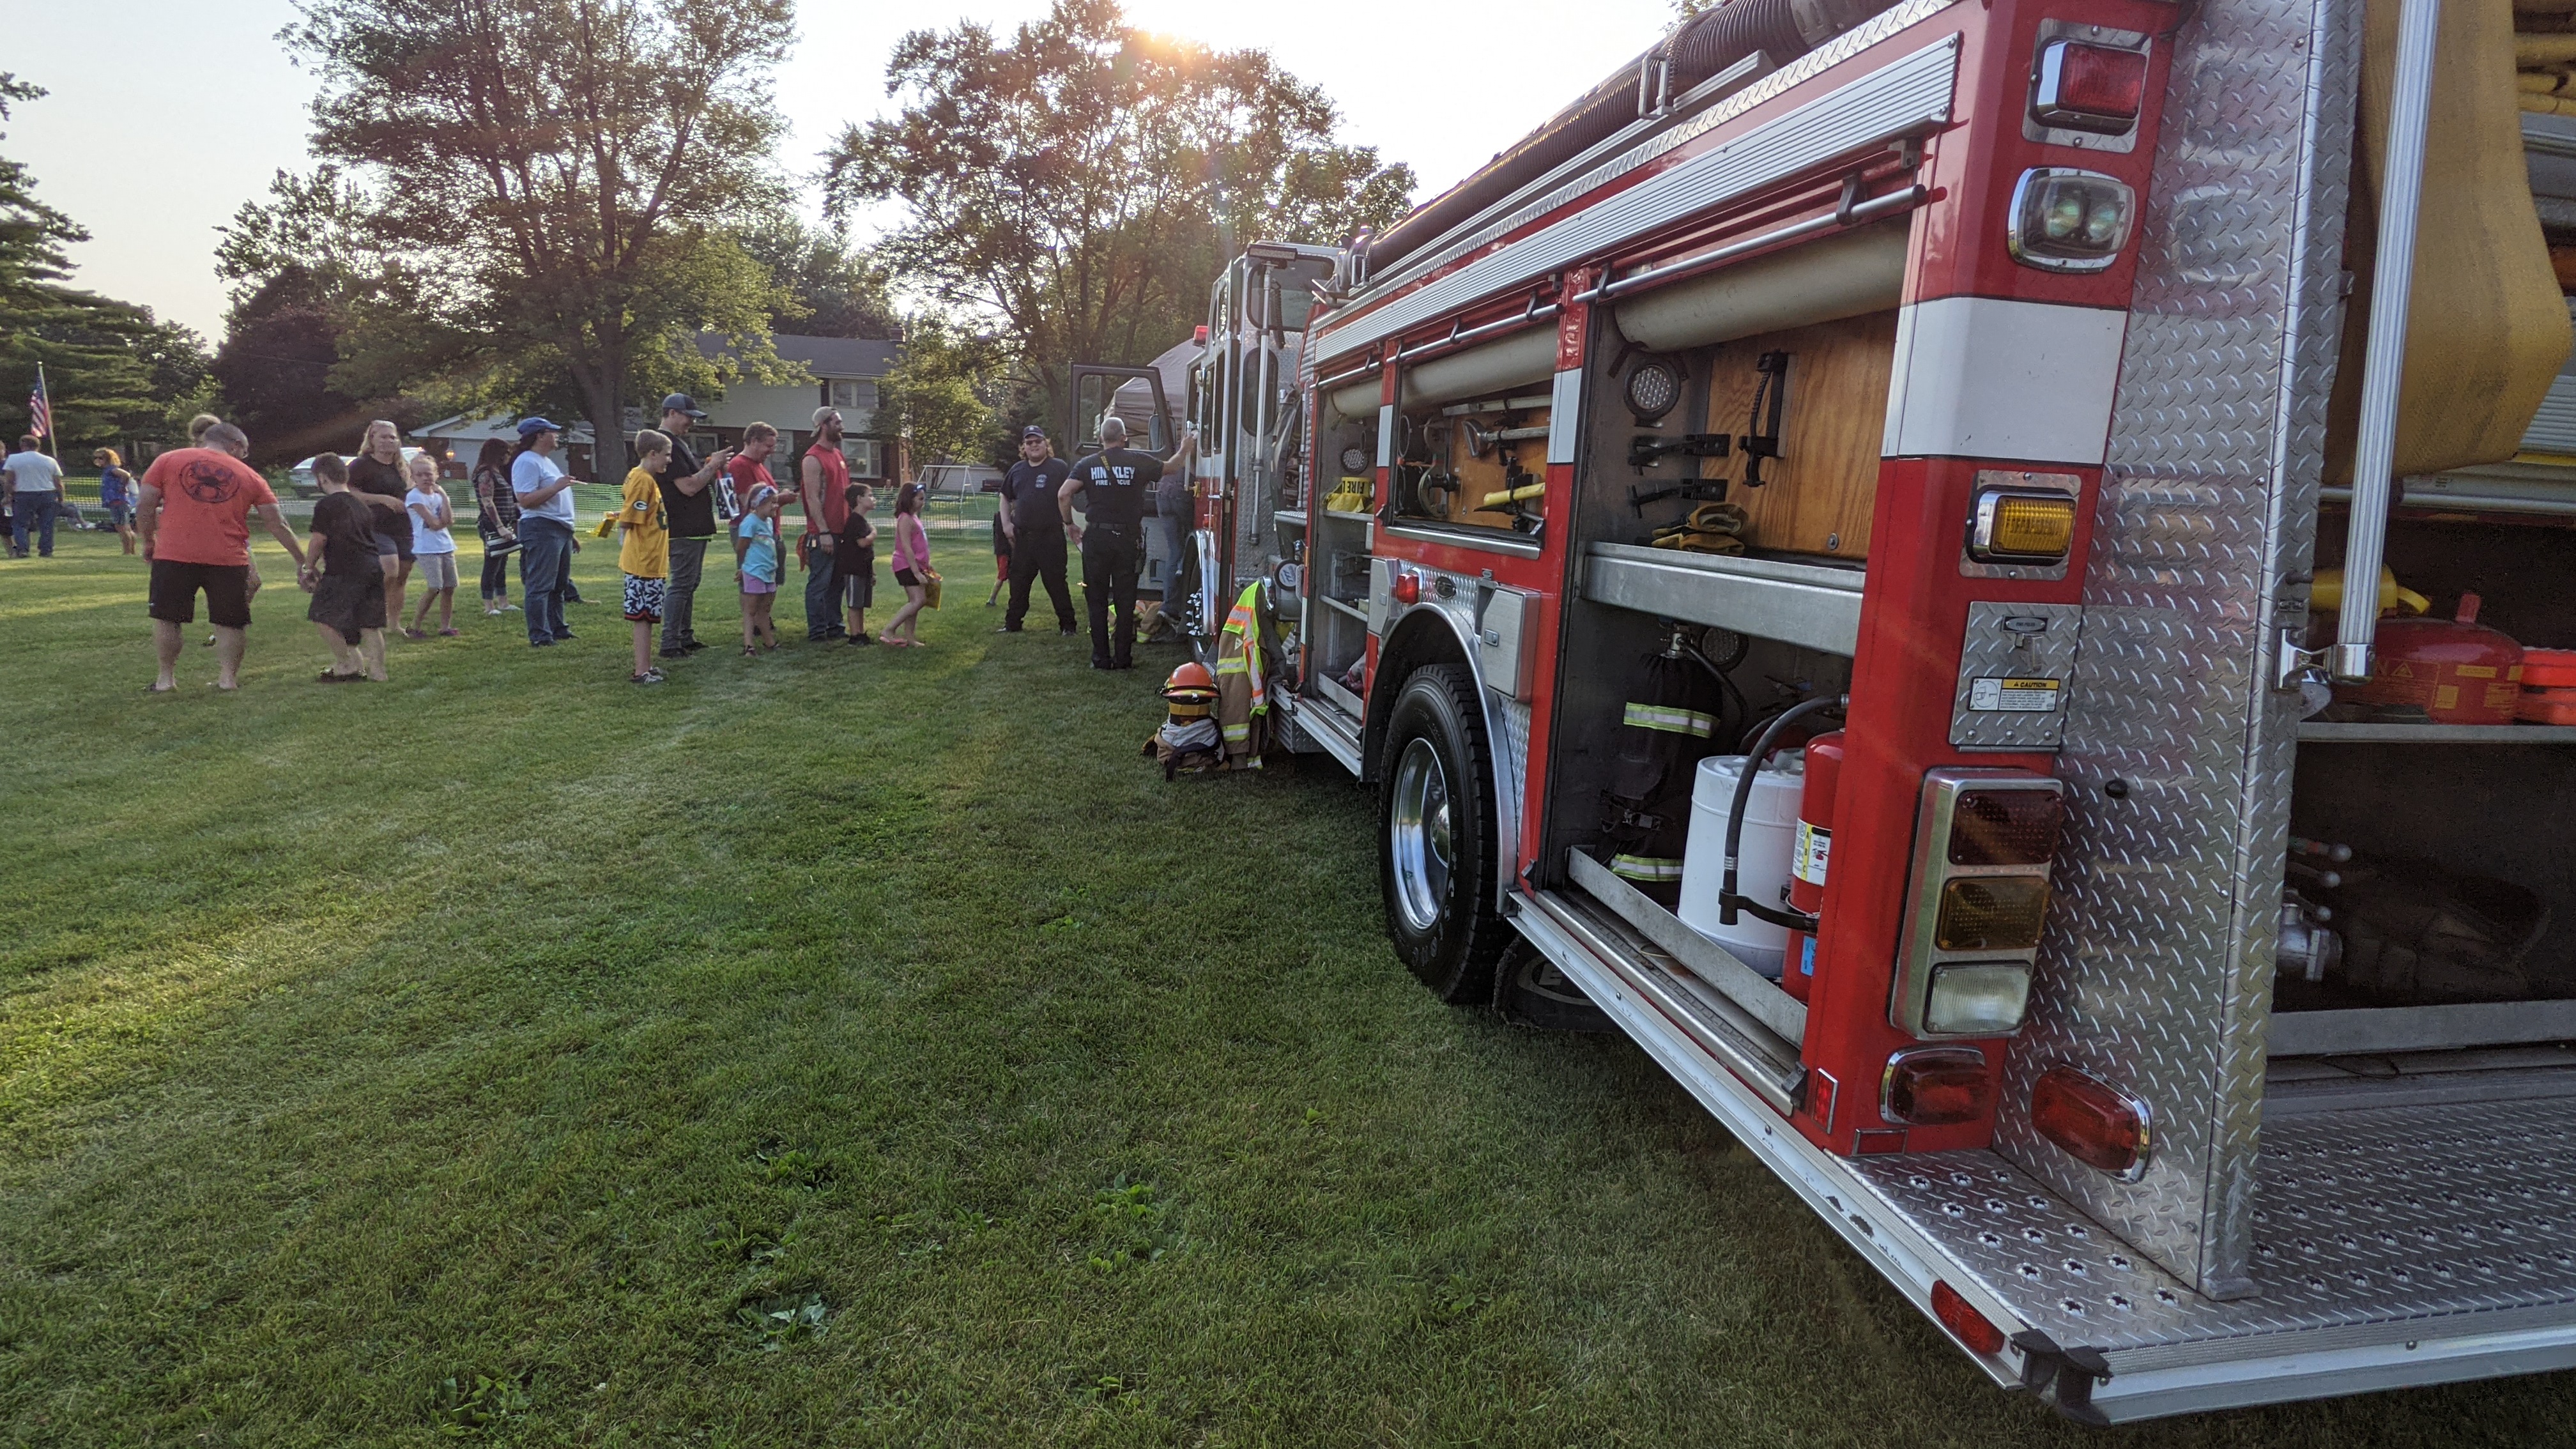 HFD Engine 1805 in attendance at the annual fireworks festival